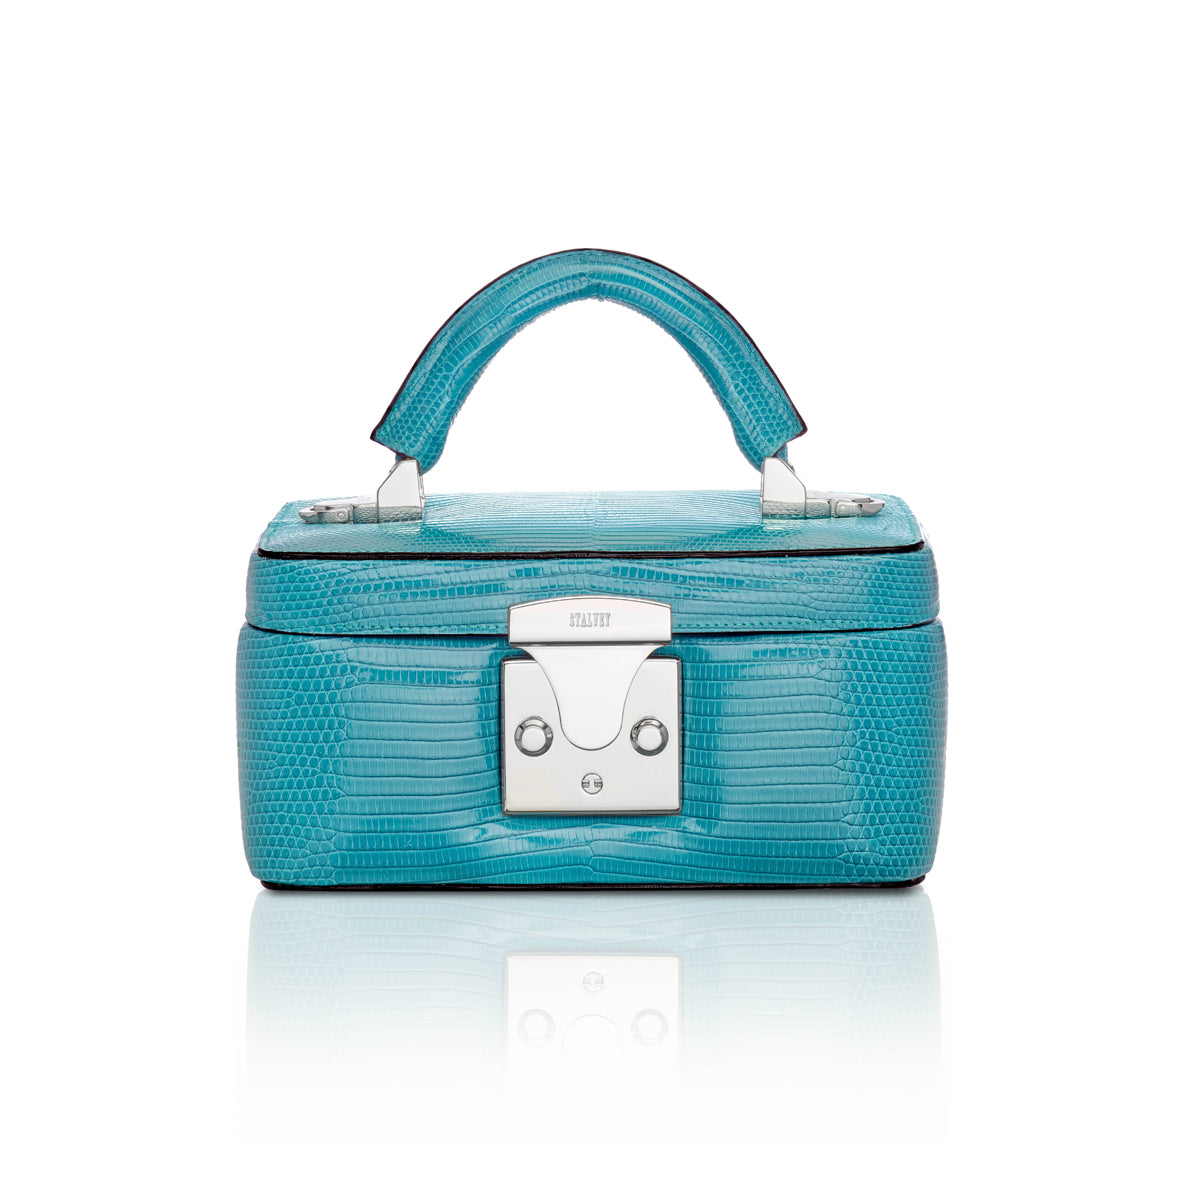 STALVEY Beauty Case in Teal Lizard Front View